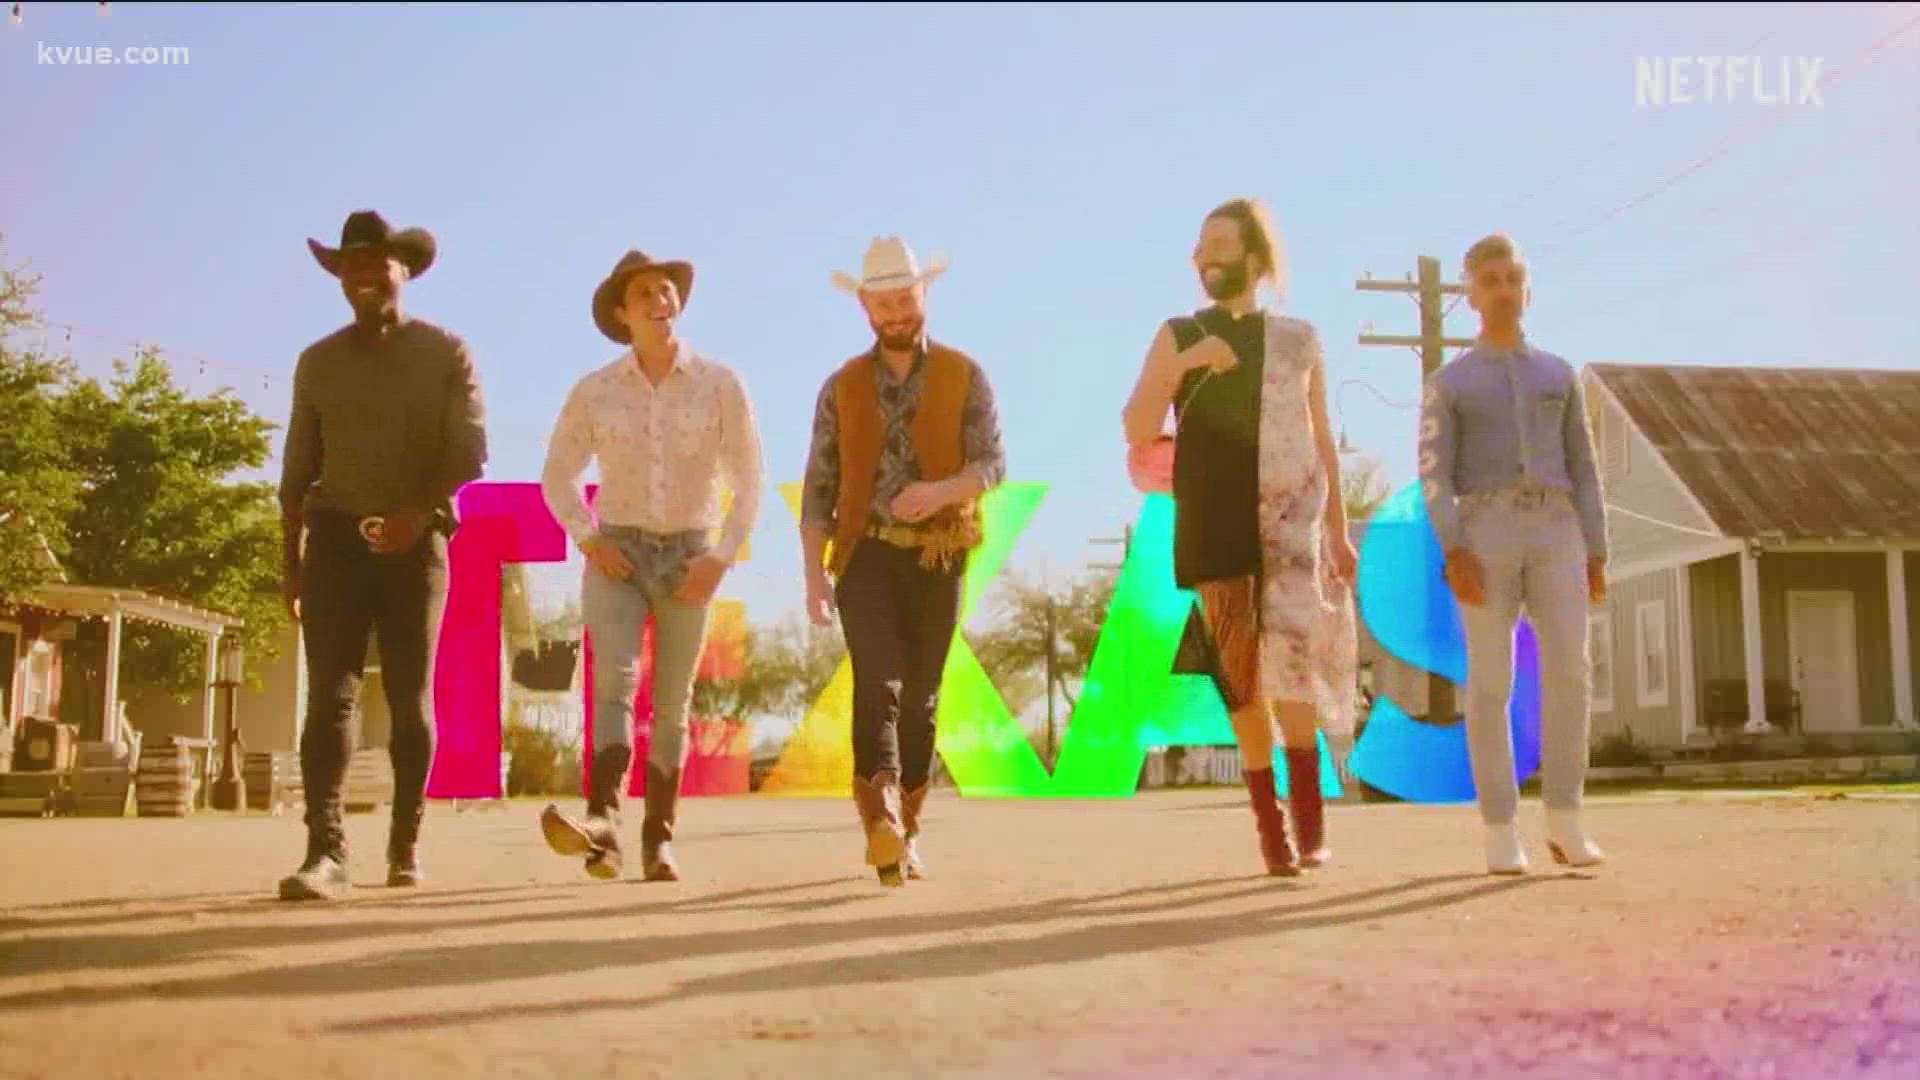 "Queer Eye" is ready to show everyone that self-care is bigger in Texas. Netflix's hit show is premiering its sixth season, shot in Austin, on Dec. 31.